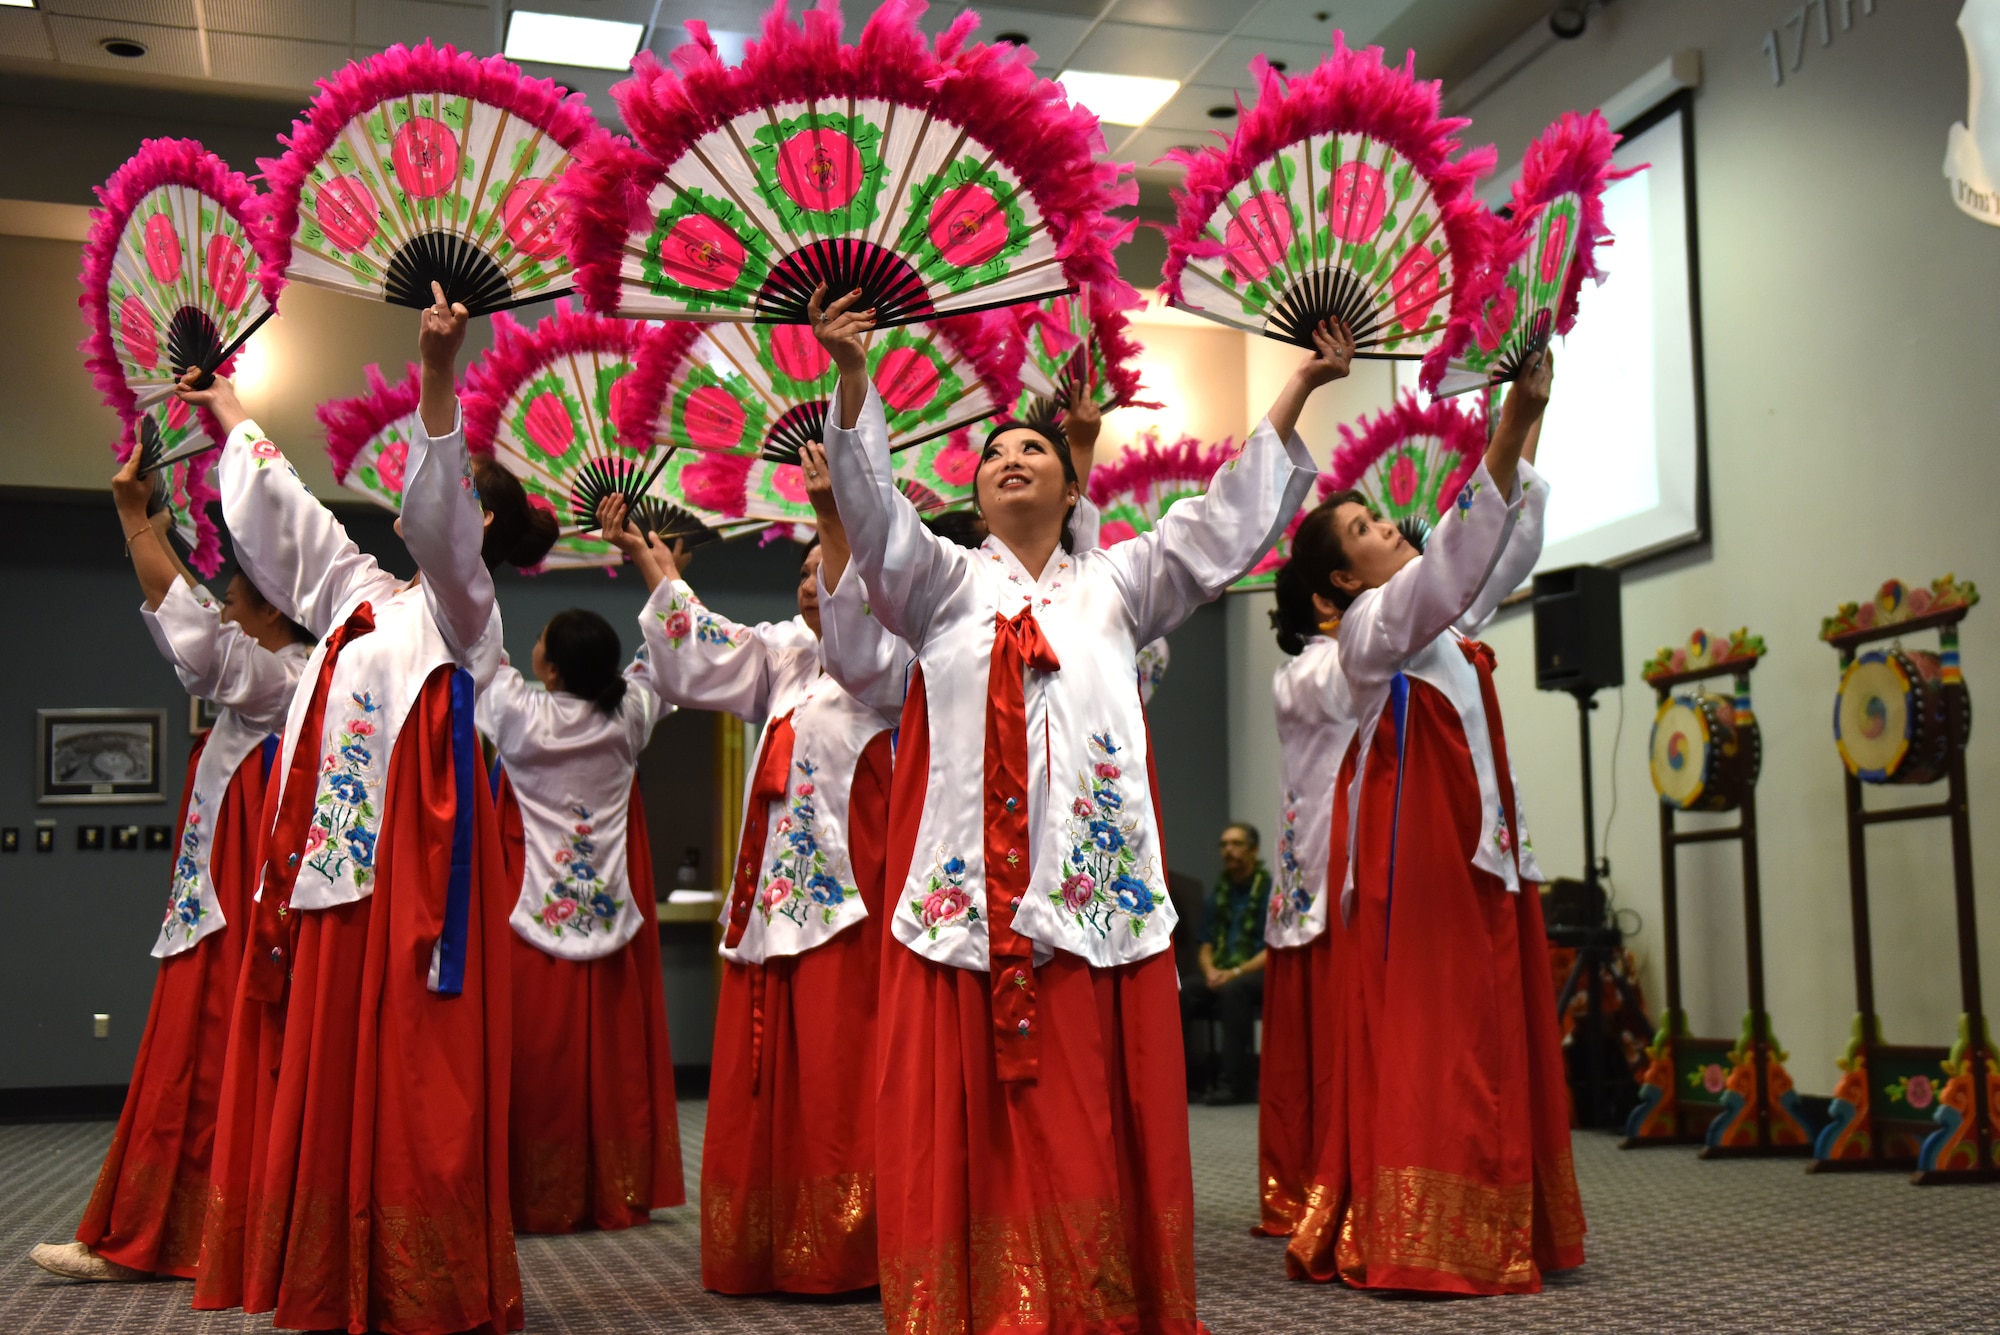 Korean dancers demonstrate a Korean Fan Dance during the Asian American Pacific Islander Heritage Month Event held at the event center on Goodfellow Air Force Base, Texas, May 22, 2019. The court of the Jo-Sun dynasty was the basis for the intricate costuming and very precise movements. (U.S. Air Force photo by Senior Airman Seraiah Hines/Released)